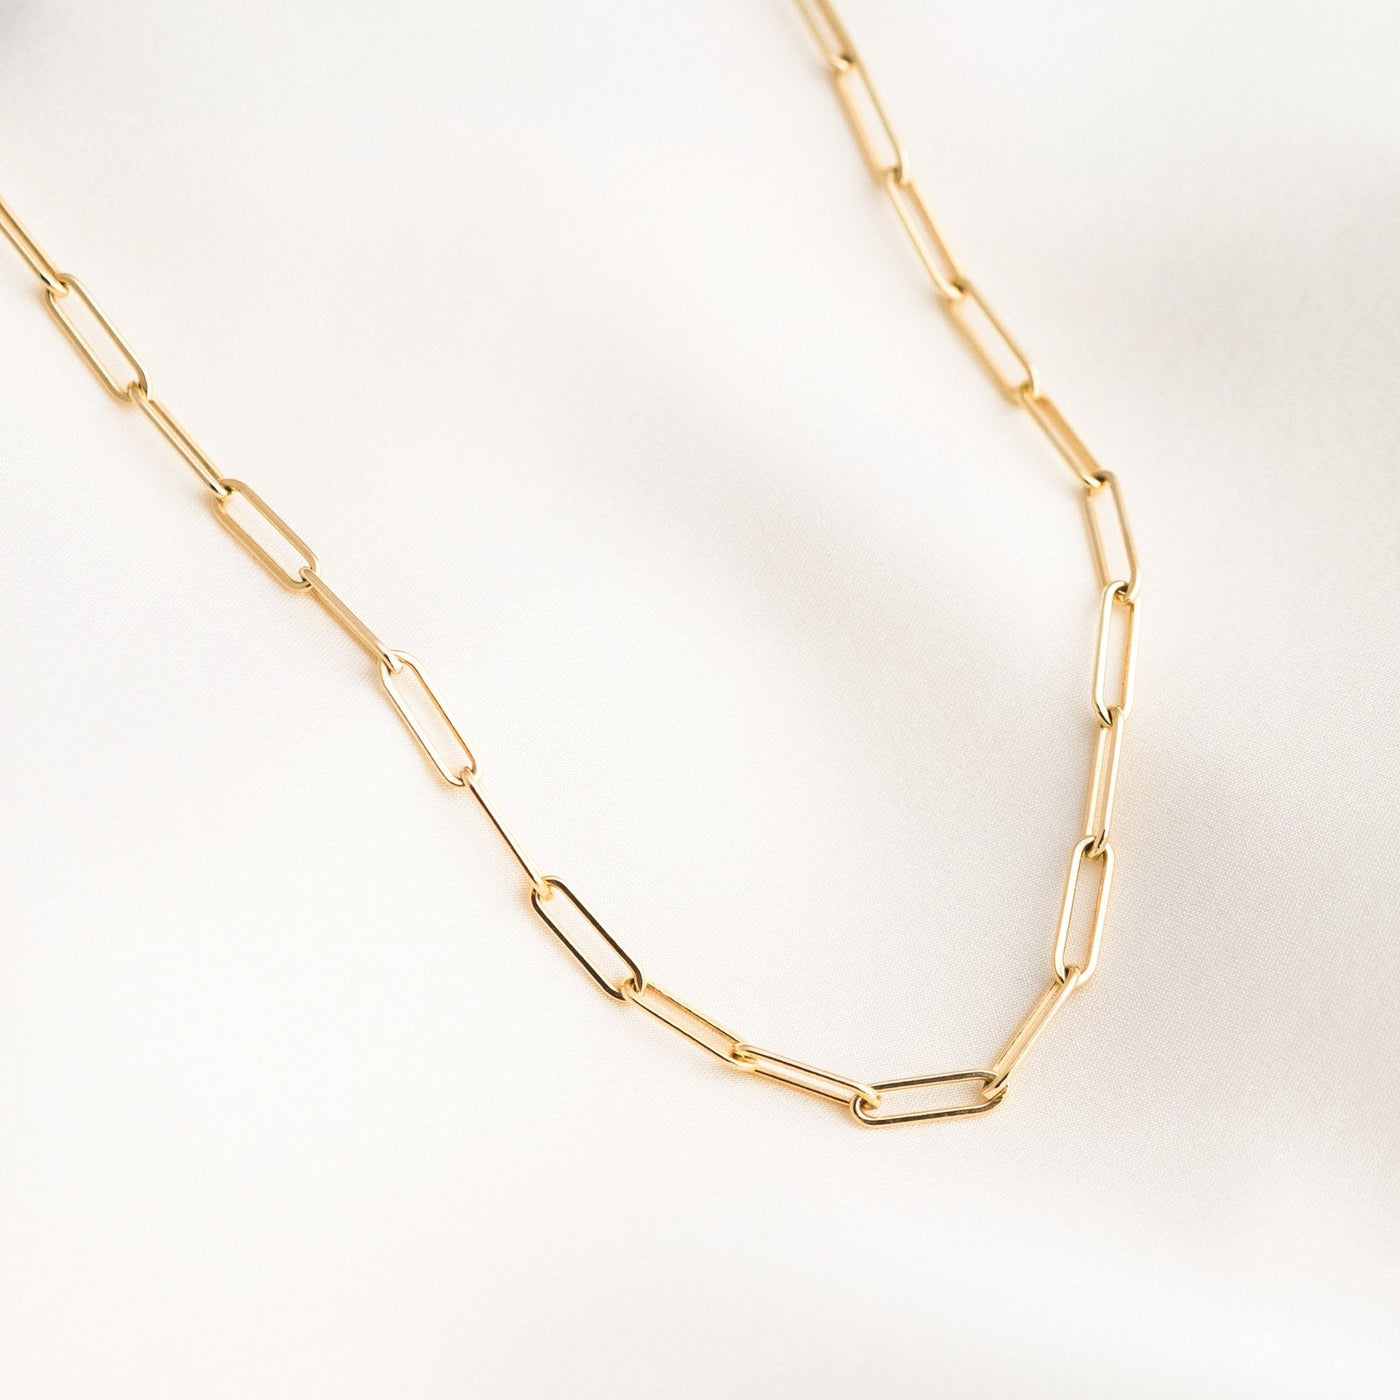 Chunky Paperclip Necklace | Simple & Dainty Jewelry